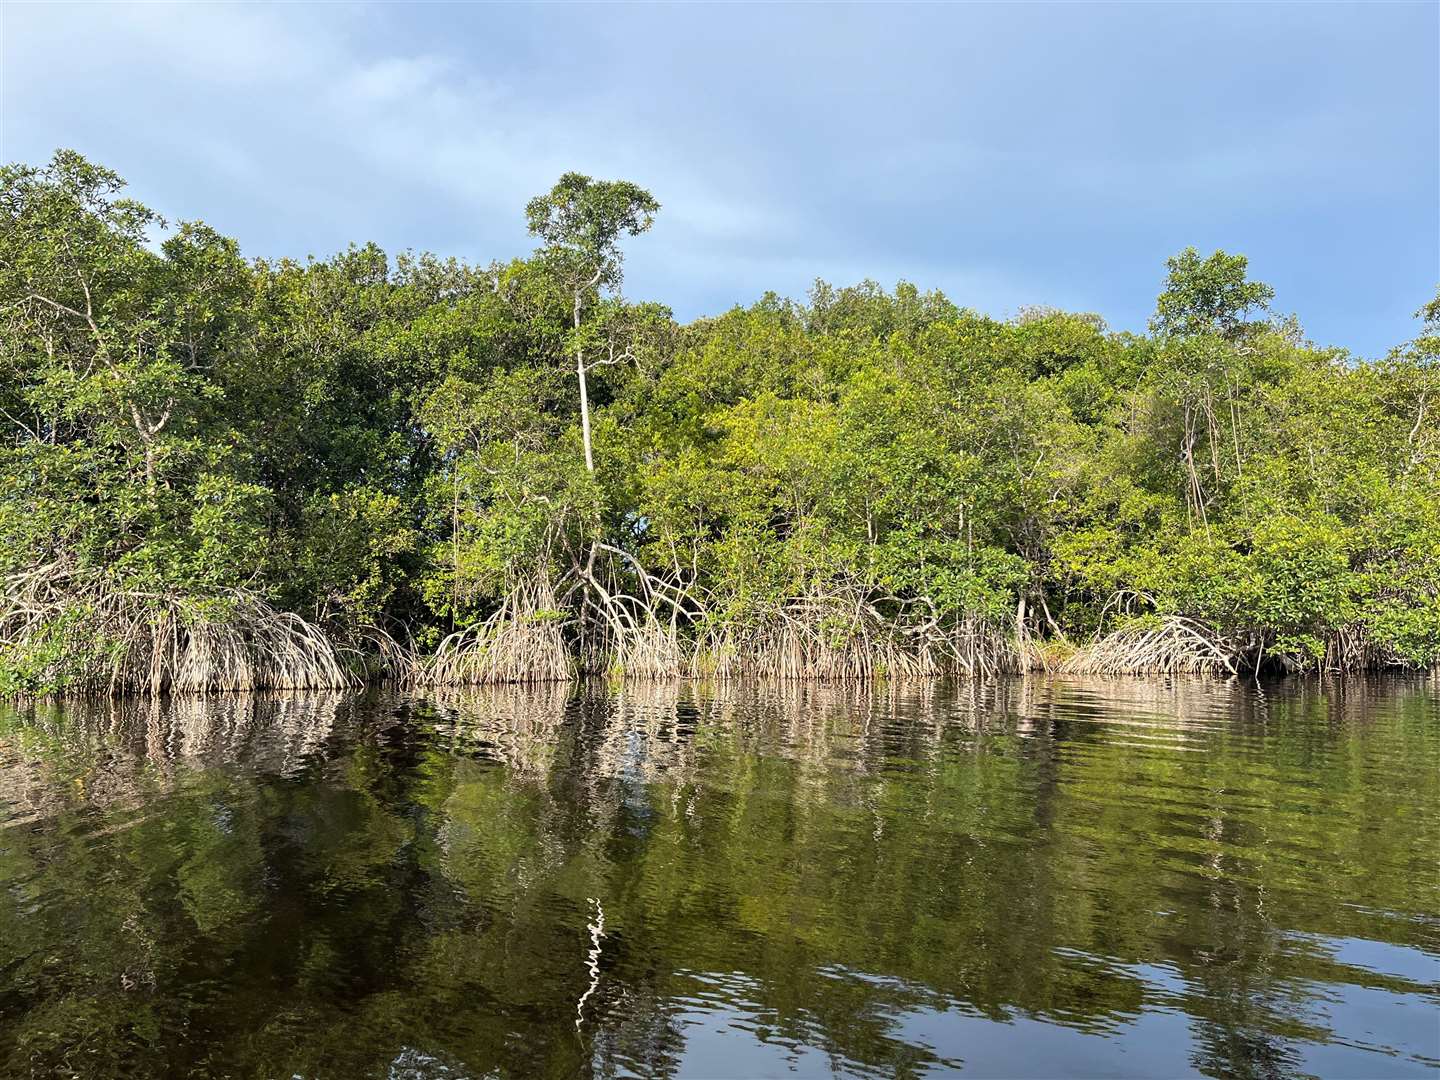 Mangroves provide shelter for wildlife, store carbon and protect coastal areas from storms (Emily Beament/PA)